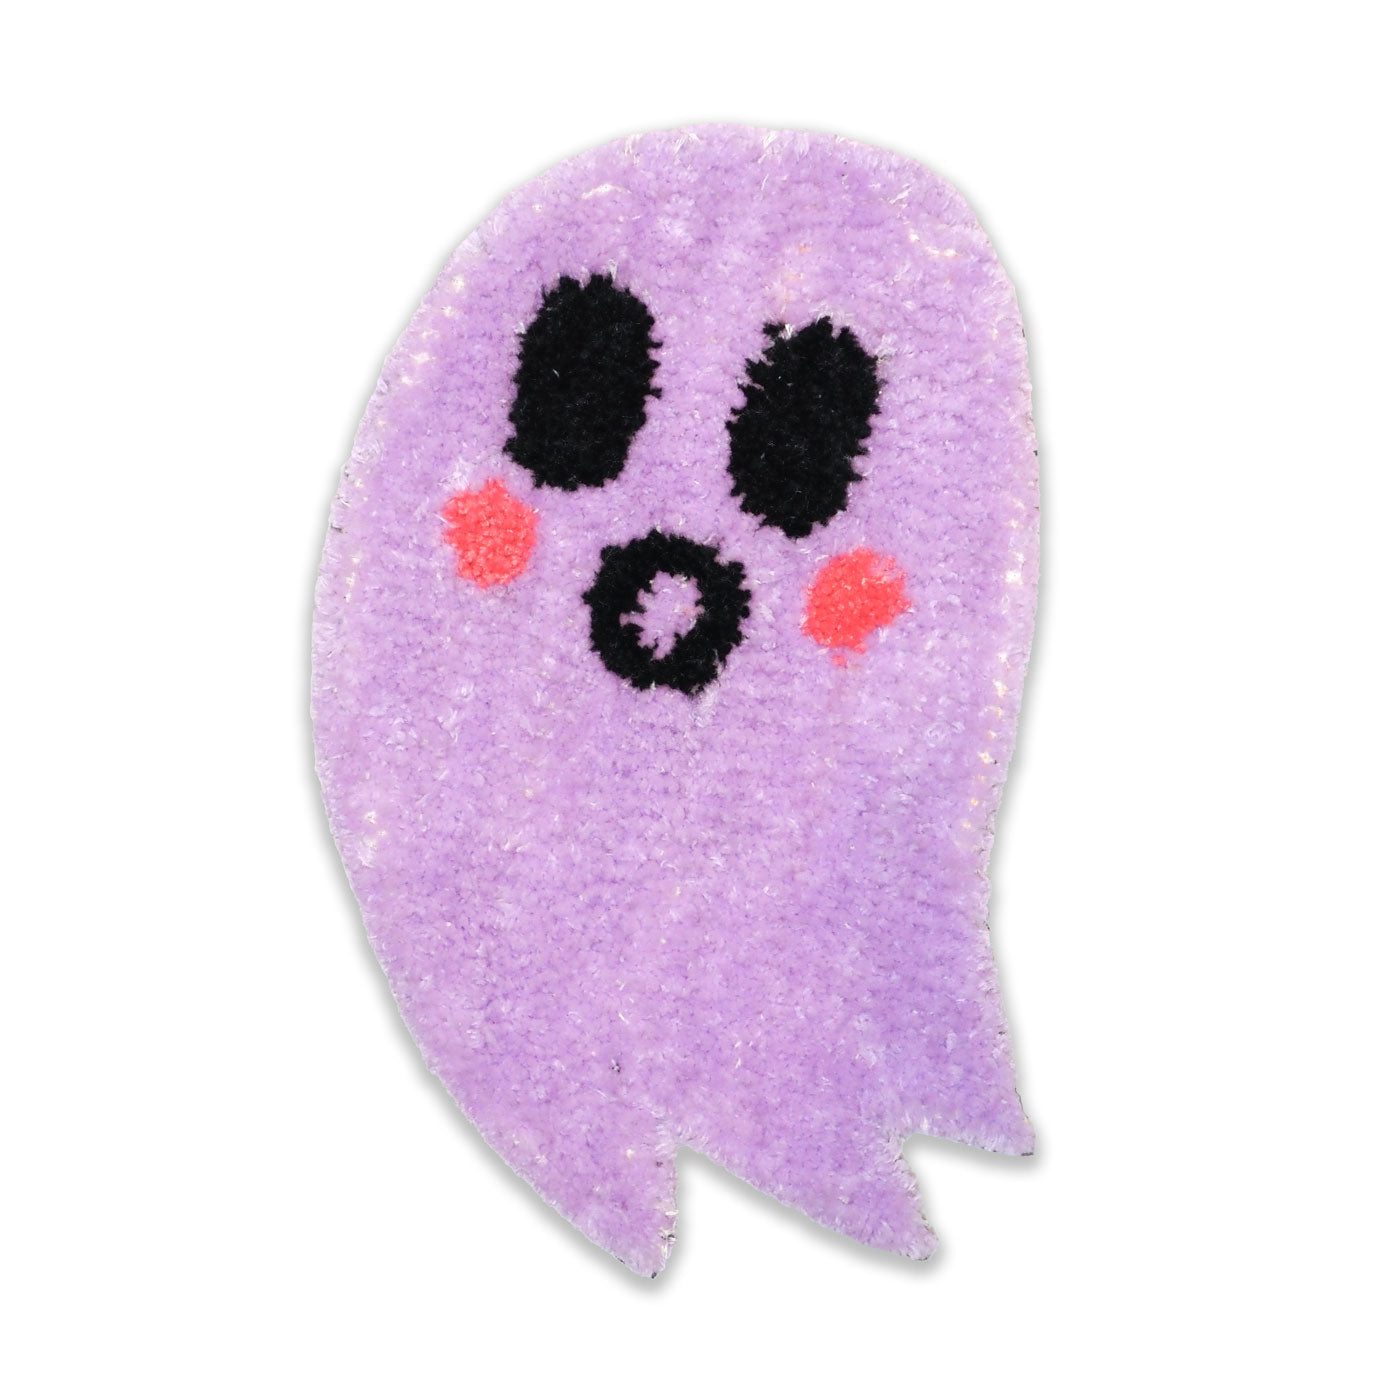 Lavender ghost hand-tufted wall hanging